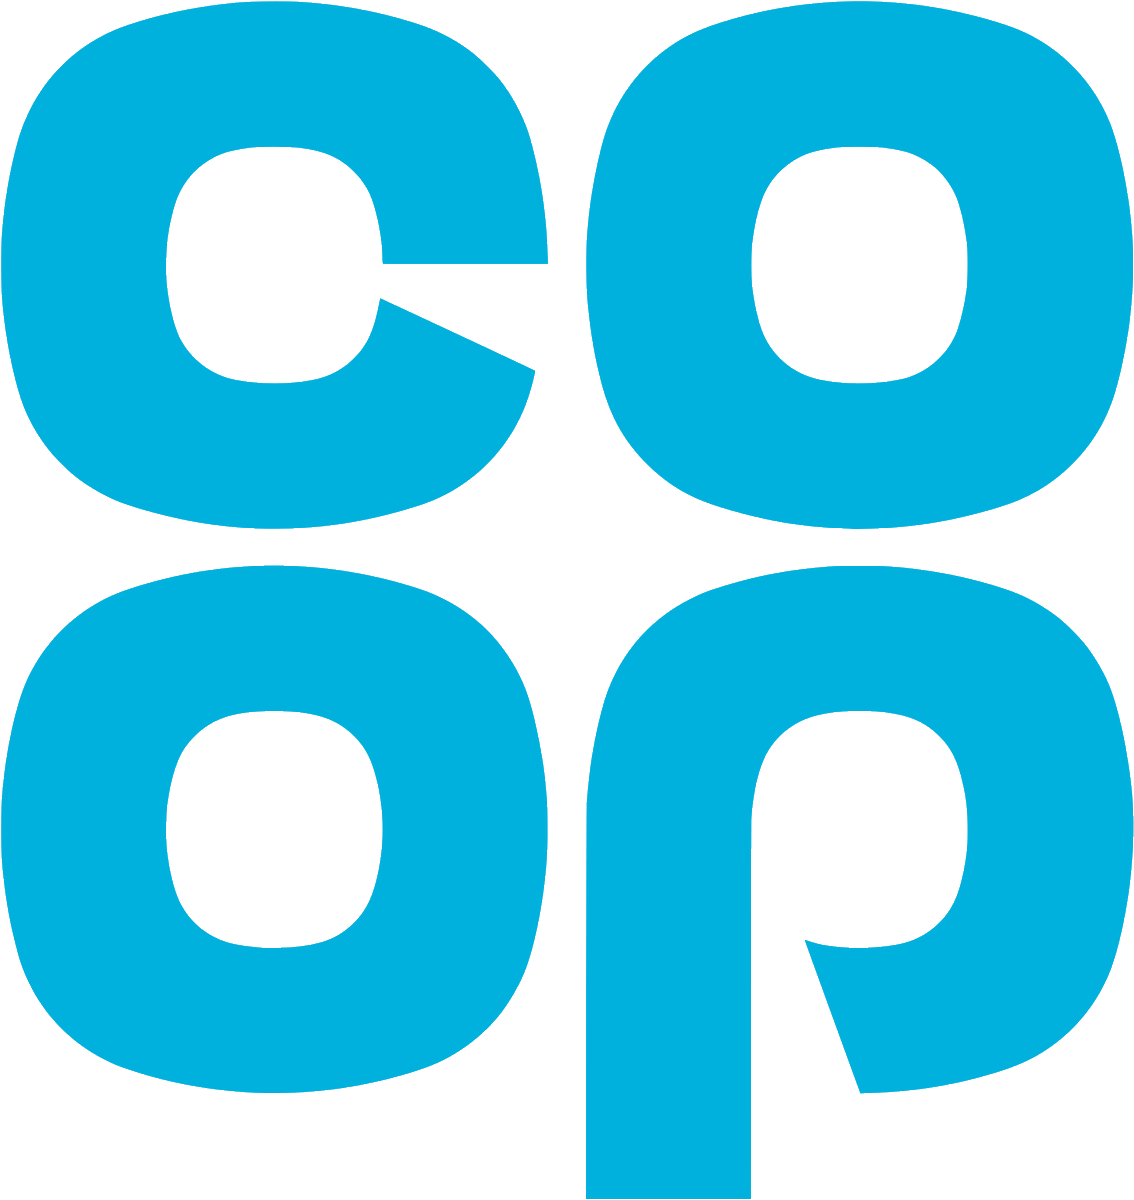 Thanks to Co-op members and customers, Bury Hospice has so far raised a total of £1,426.50 as part of the Co-op Local Community Fund. Your donations make a huge difference. Please continue to support the hospice by heading here: membership.coop.co.uk/causes/76502